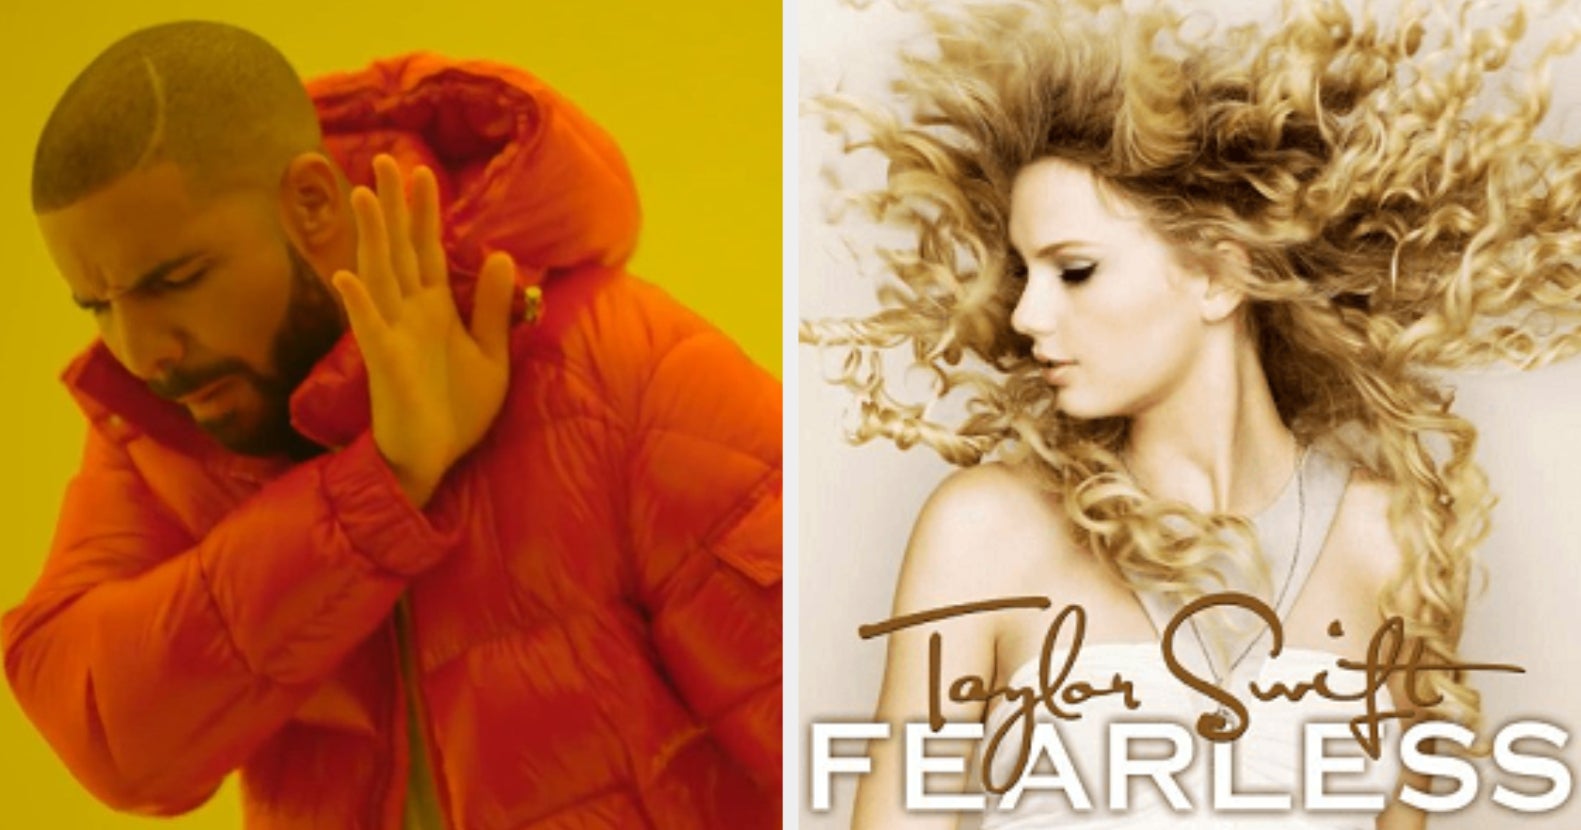 How to hide songs on Spotify, including Taylor Swift's old 'Fearless' albums